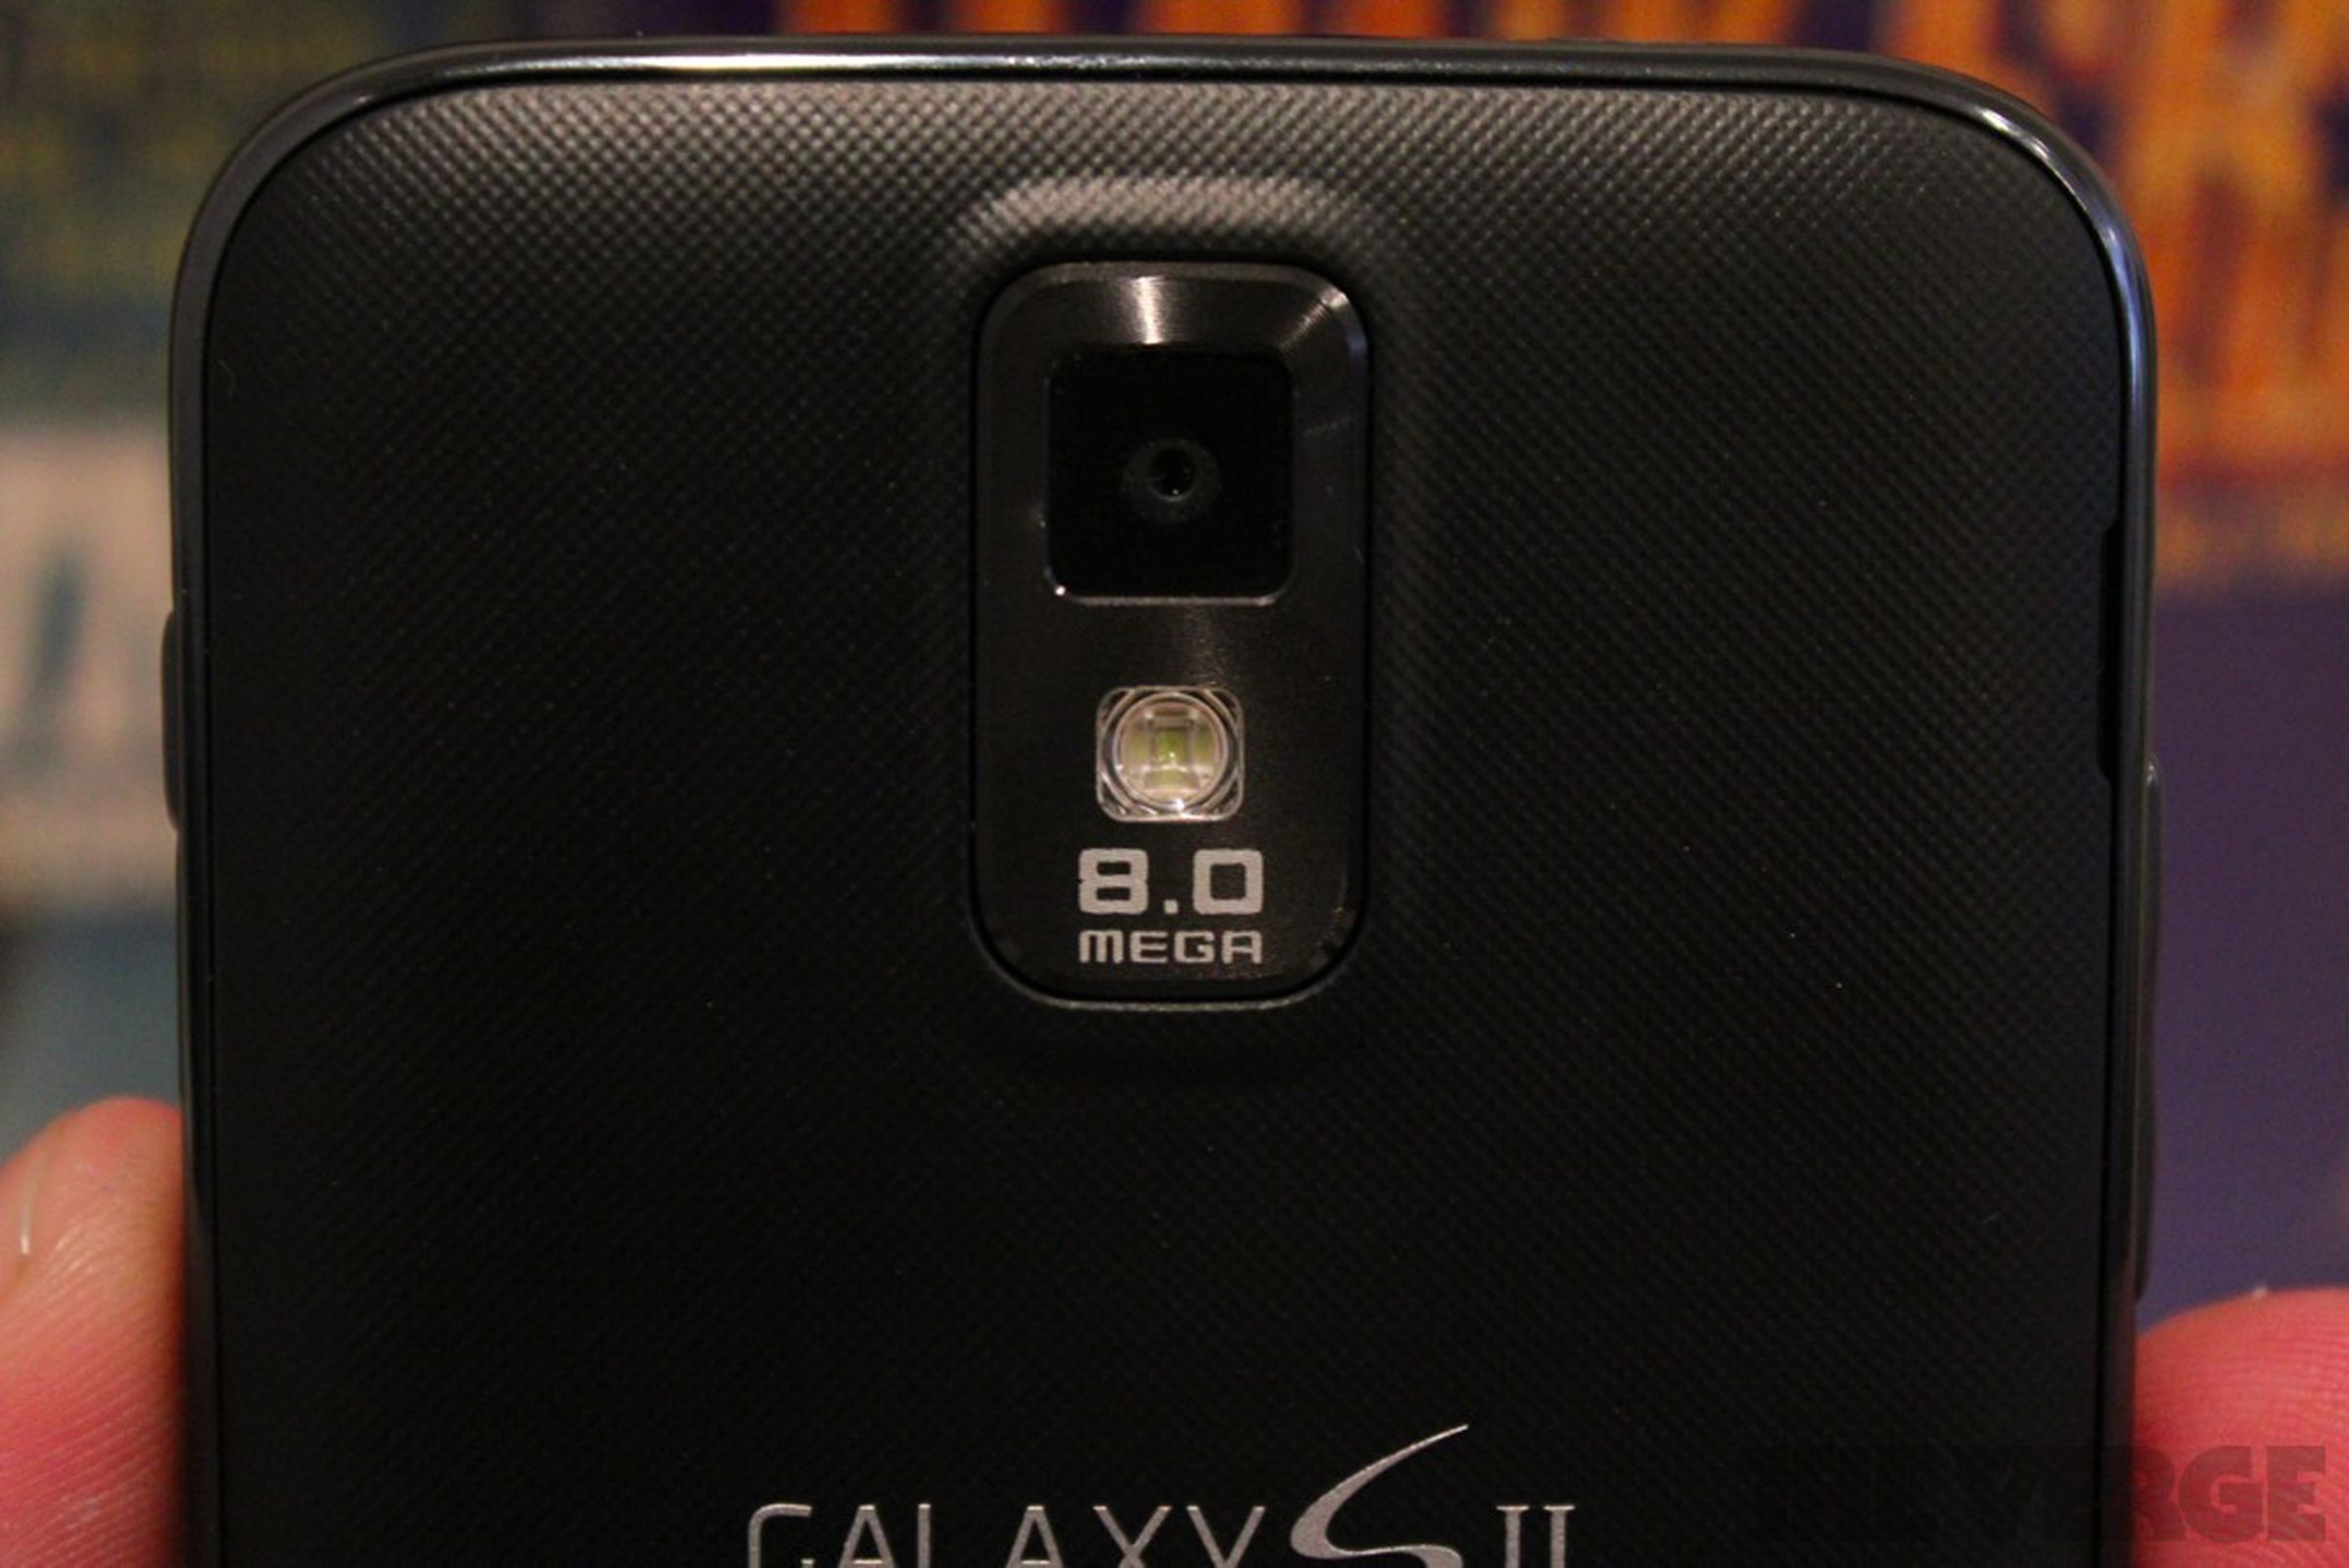 Samsung Galaxy S II for T-Mobile Review Photos